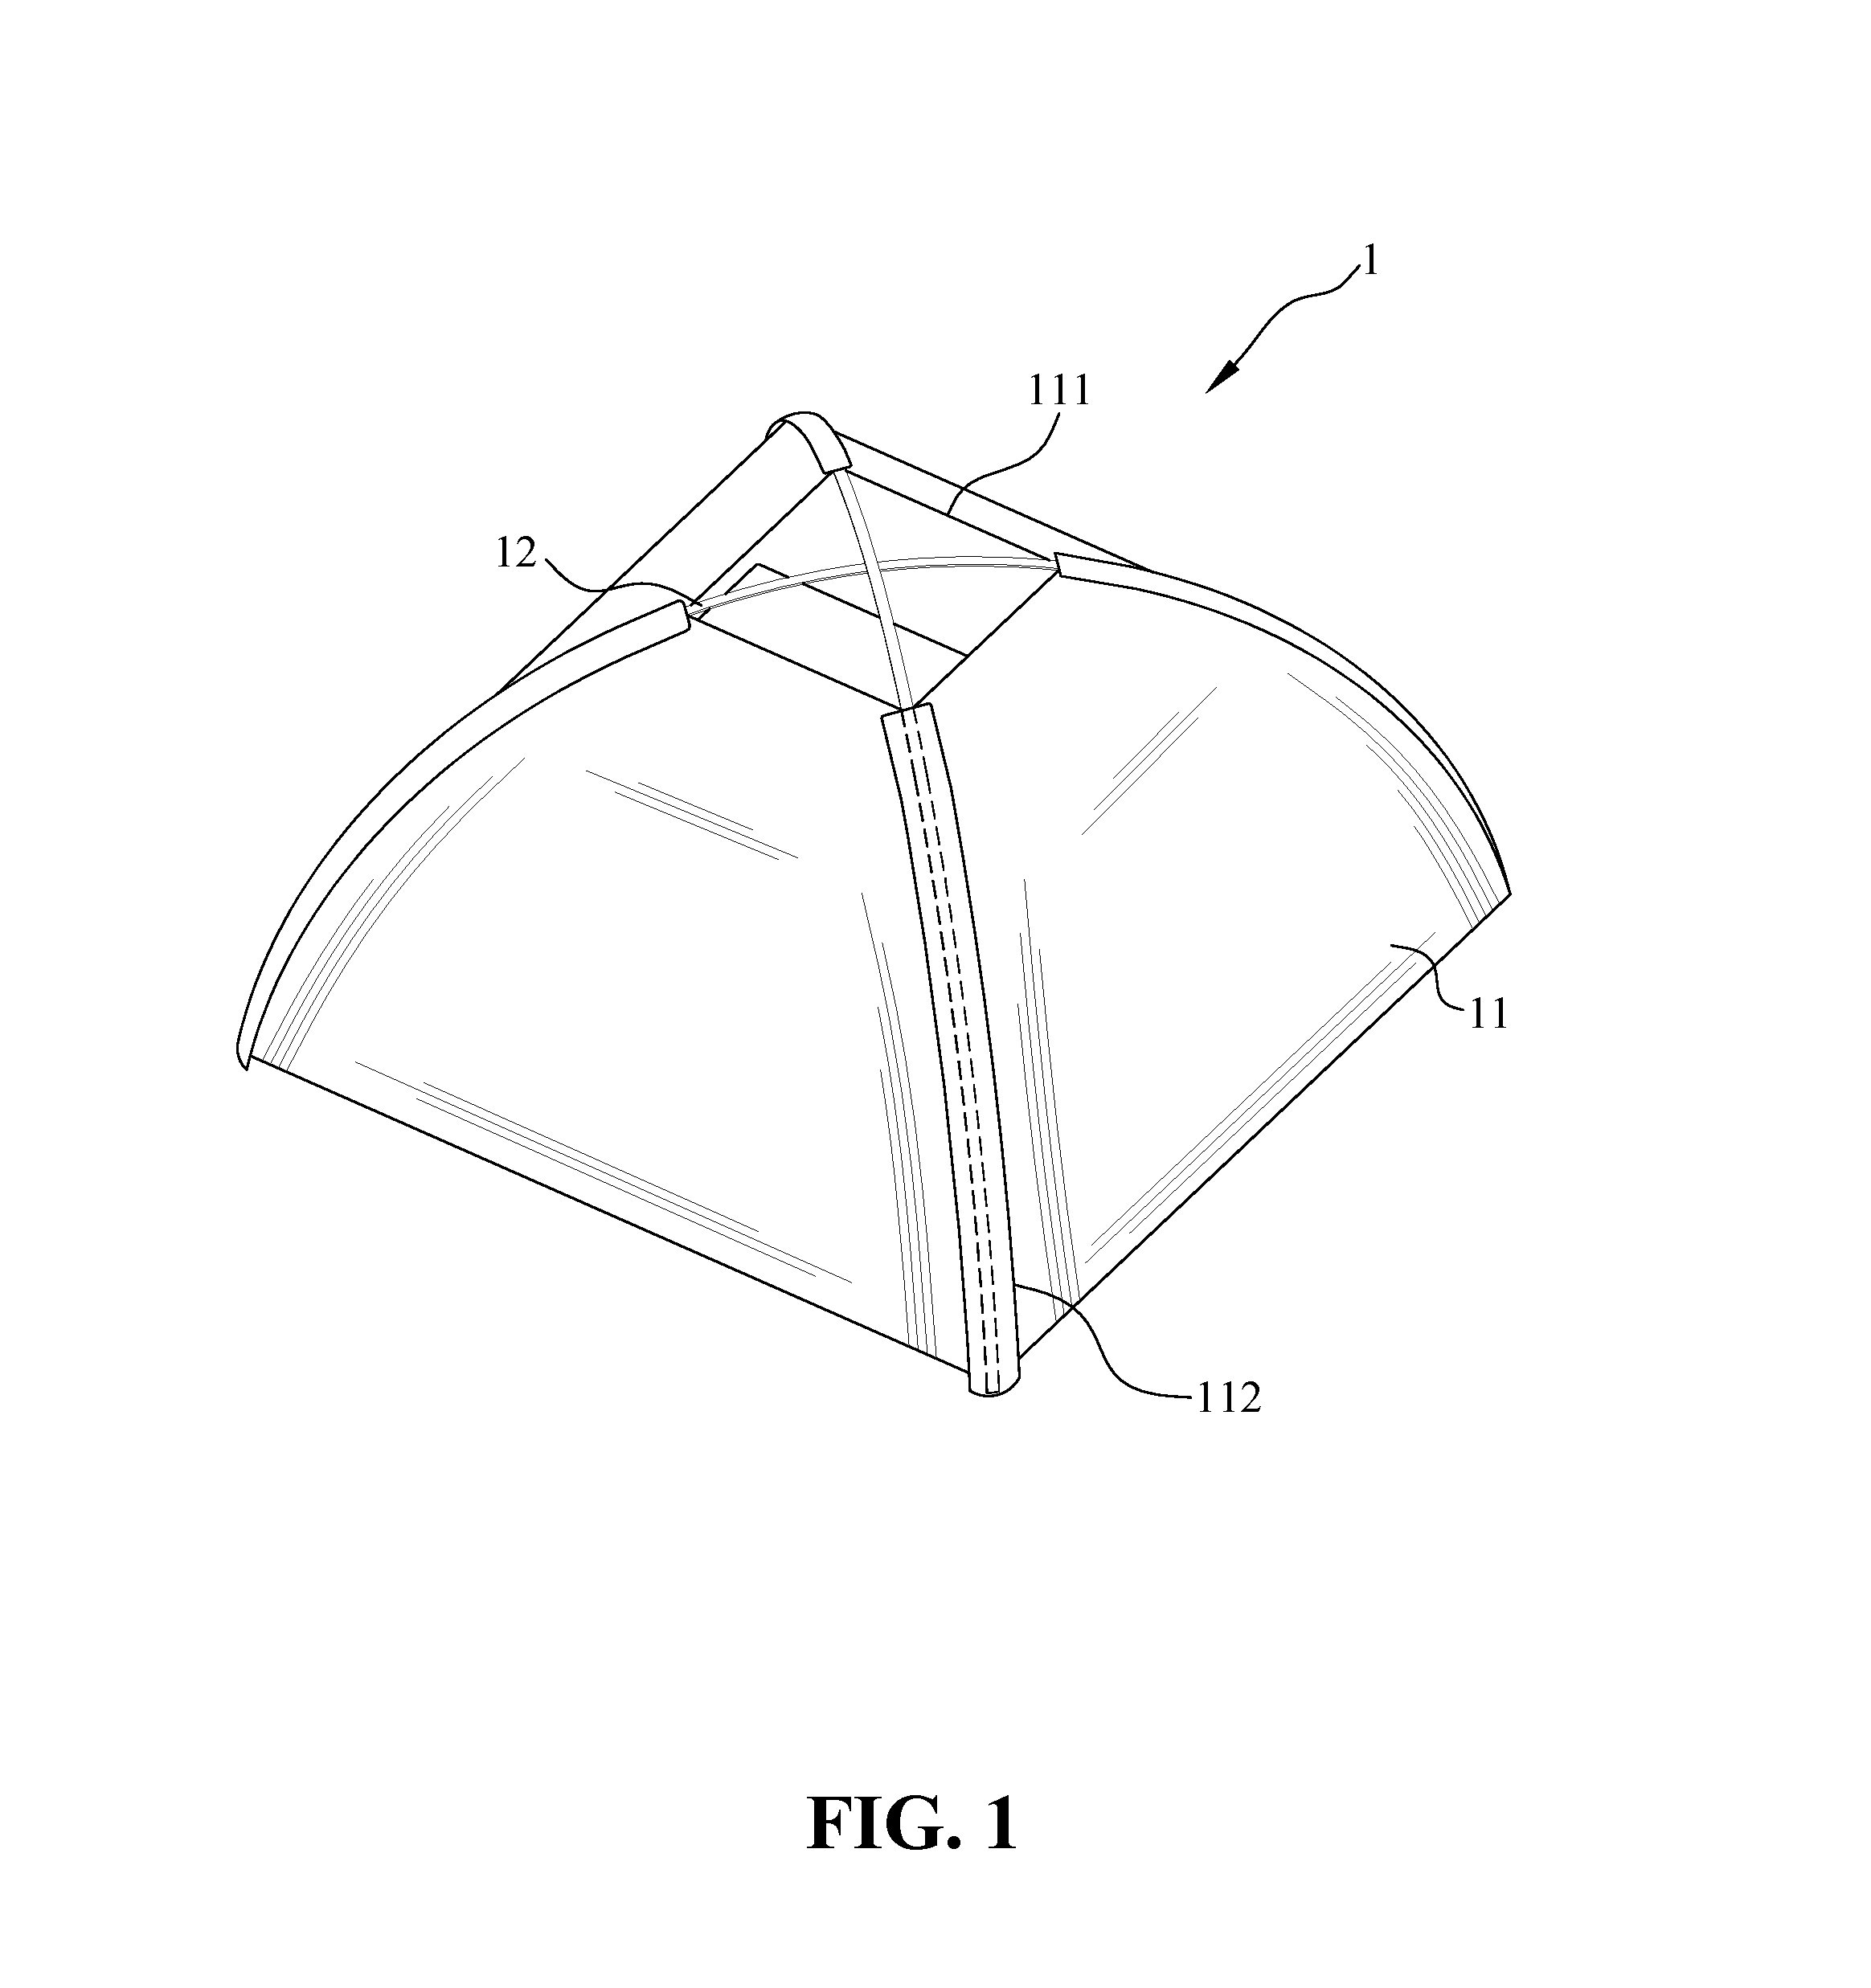 Light cover with x-shaped structure